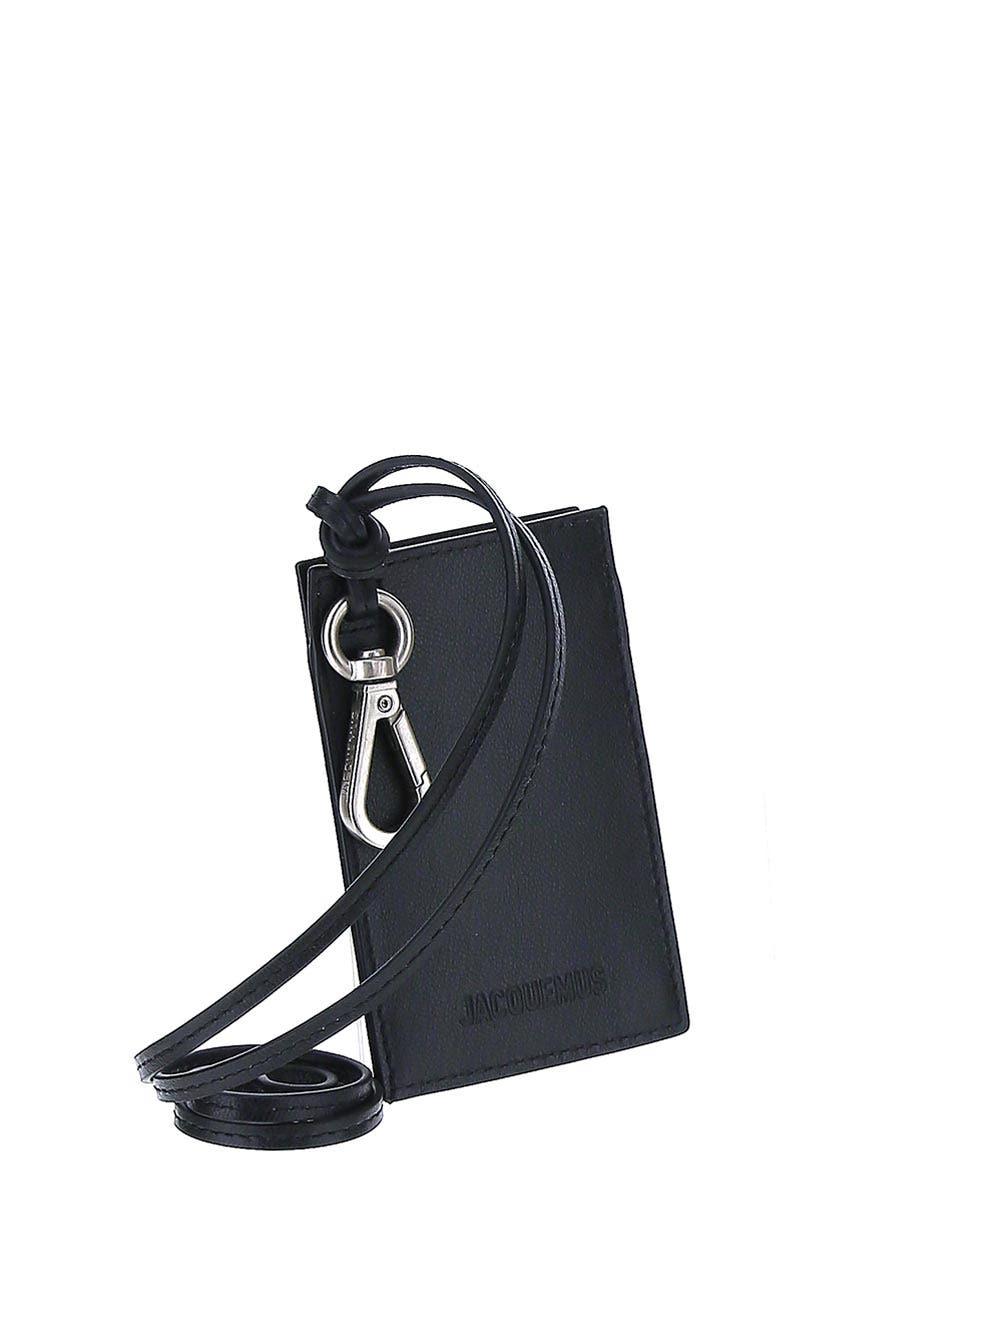 Jacquemus 'Le Port Azur' Card Holder With Strap